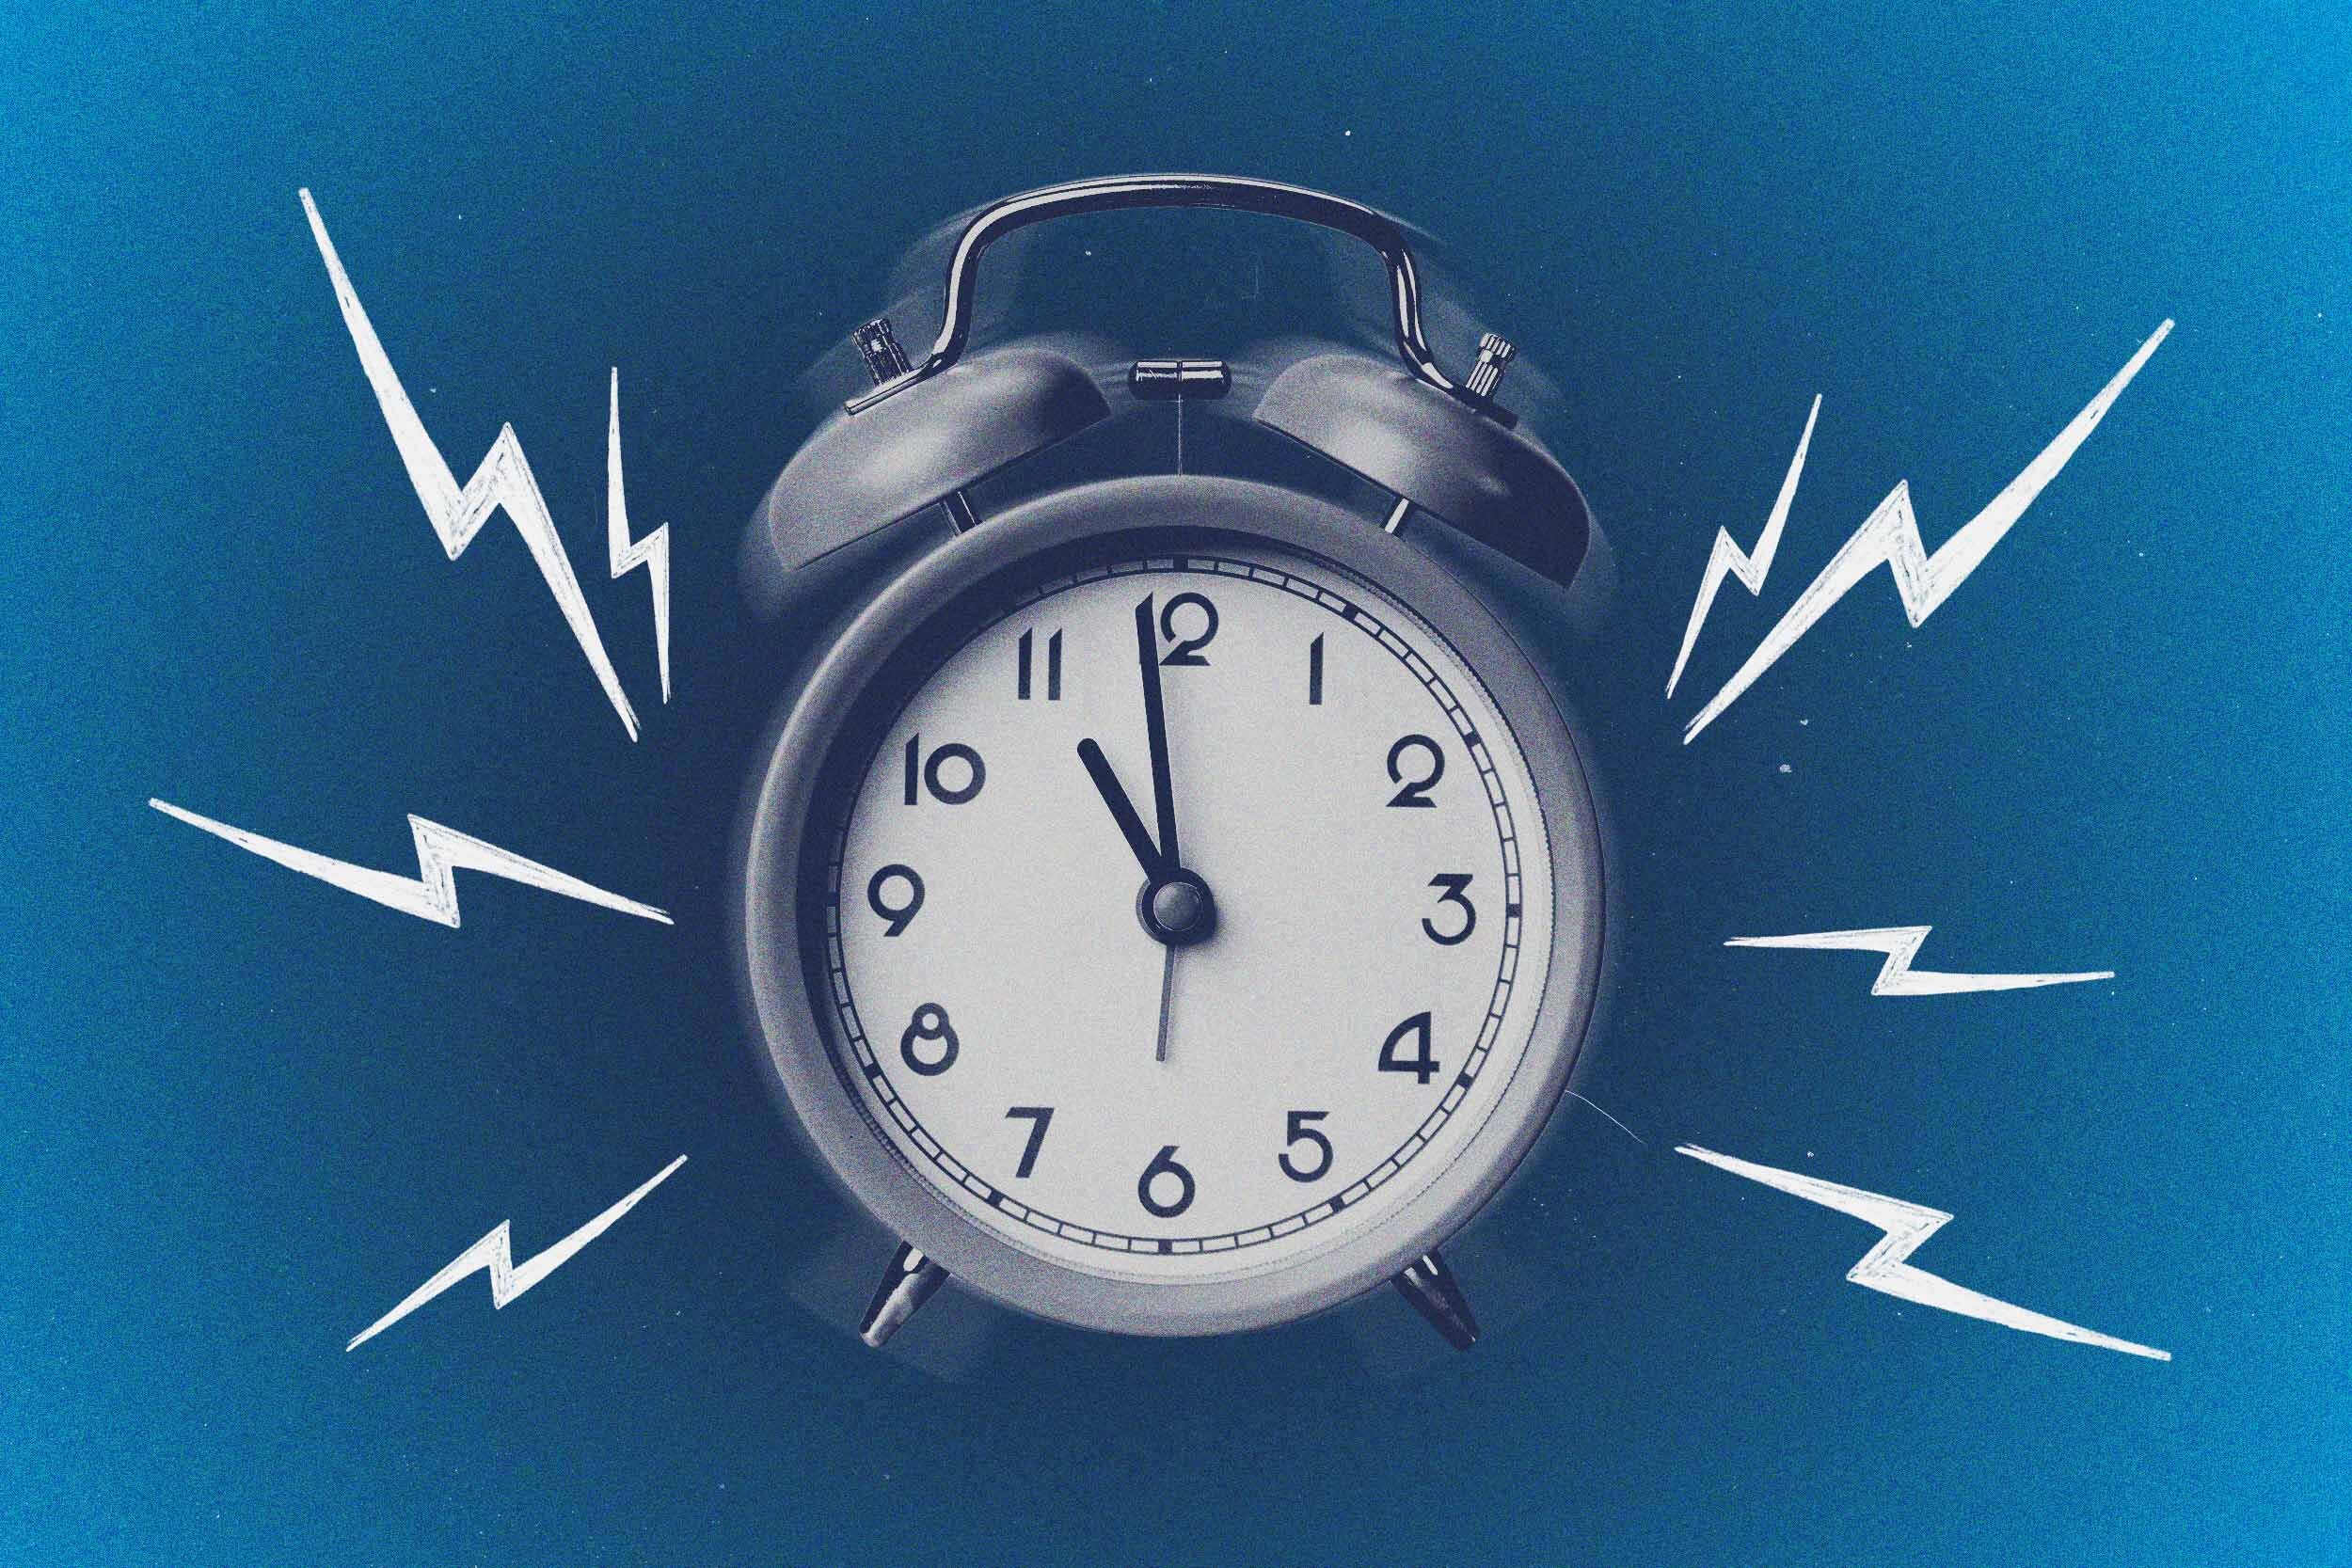 Should You Use an Alarm Clock to Wake Up From Sleep?